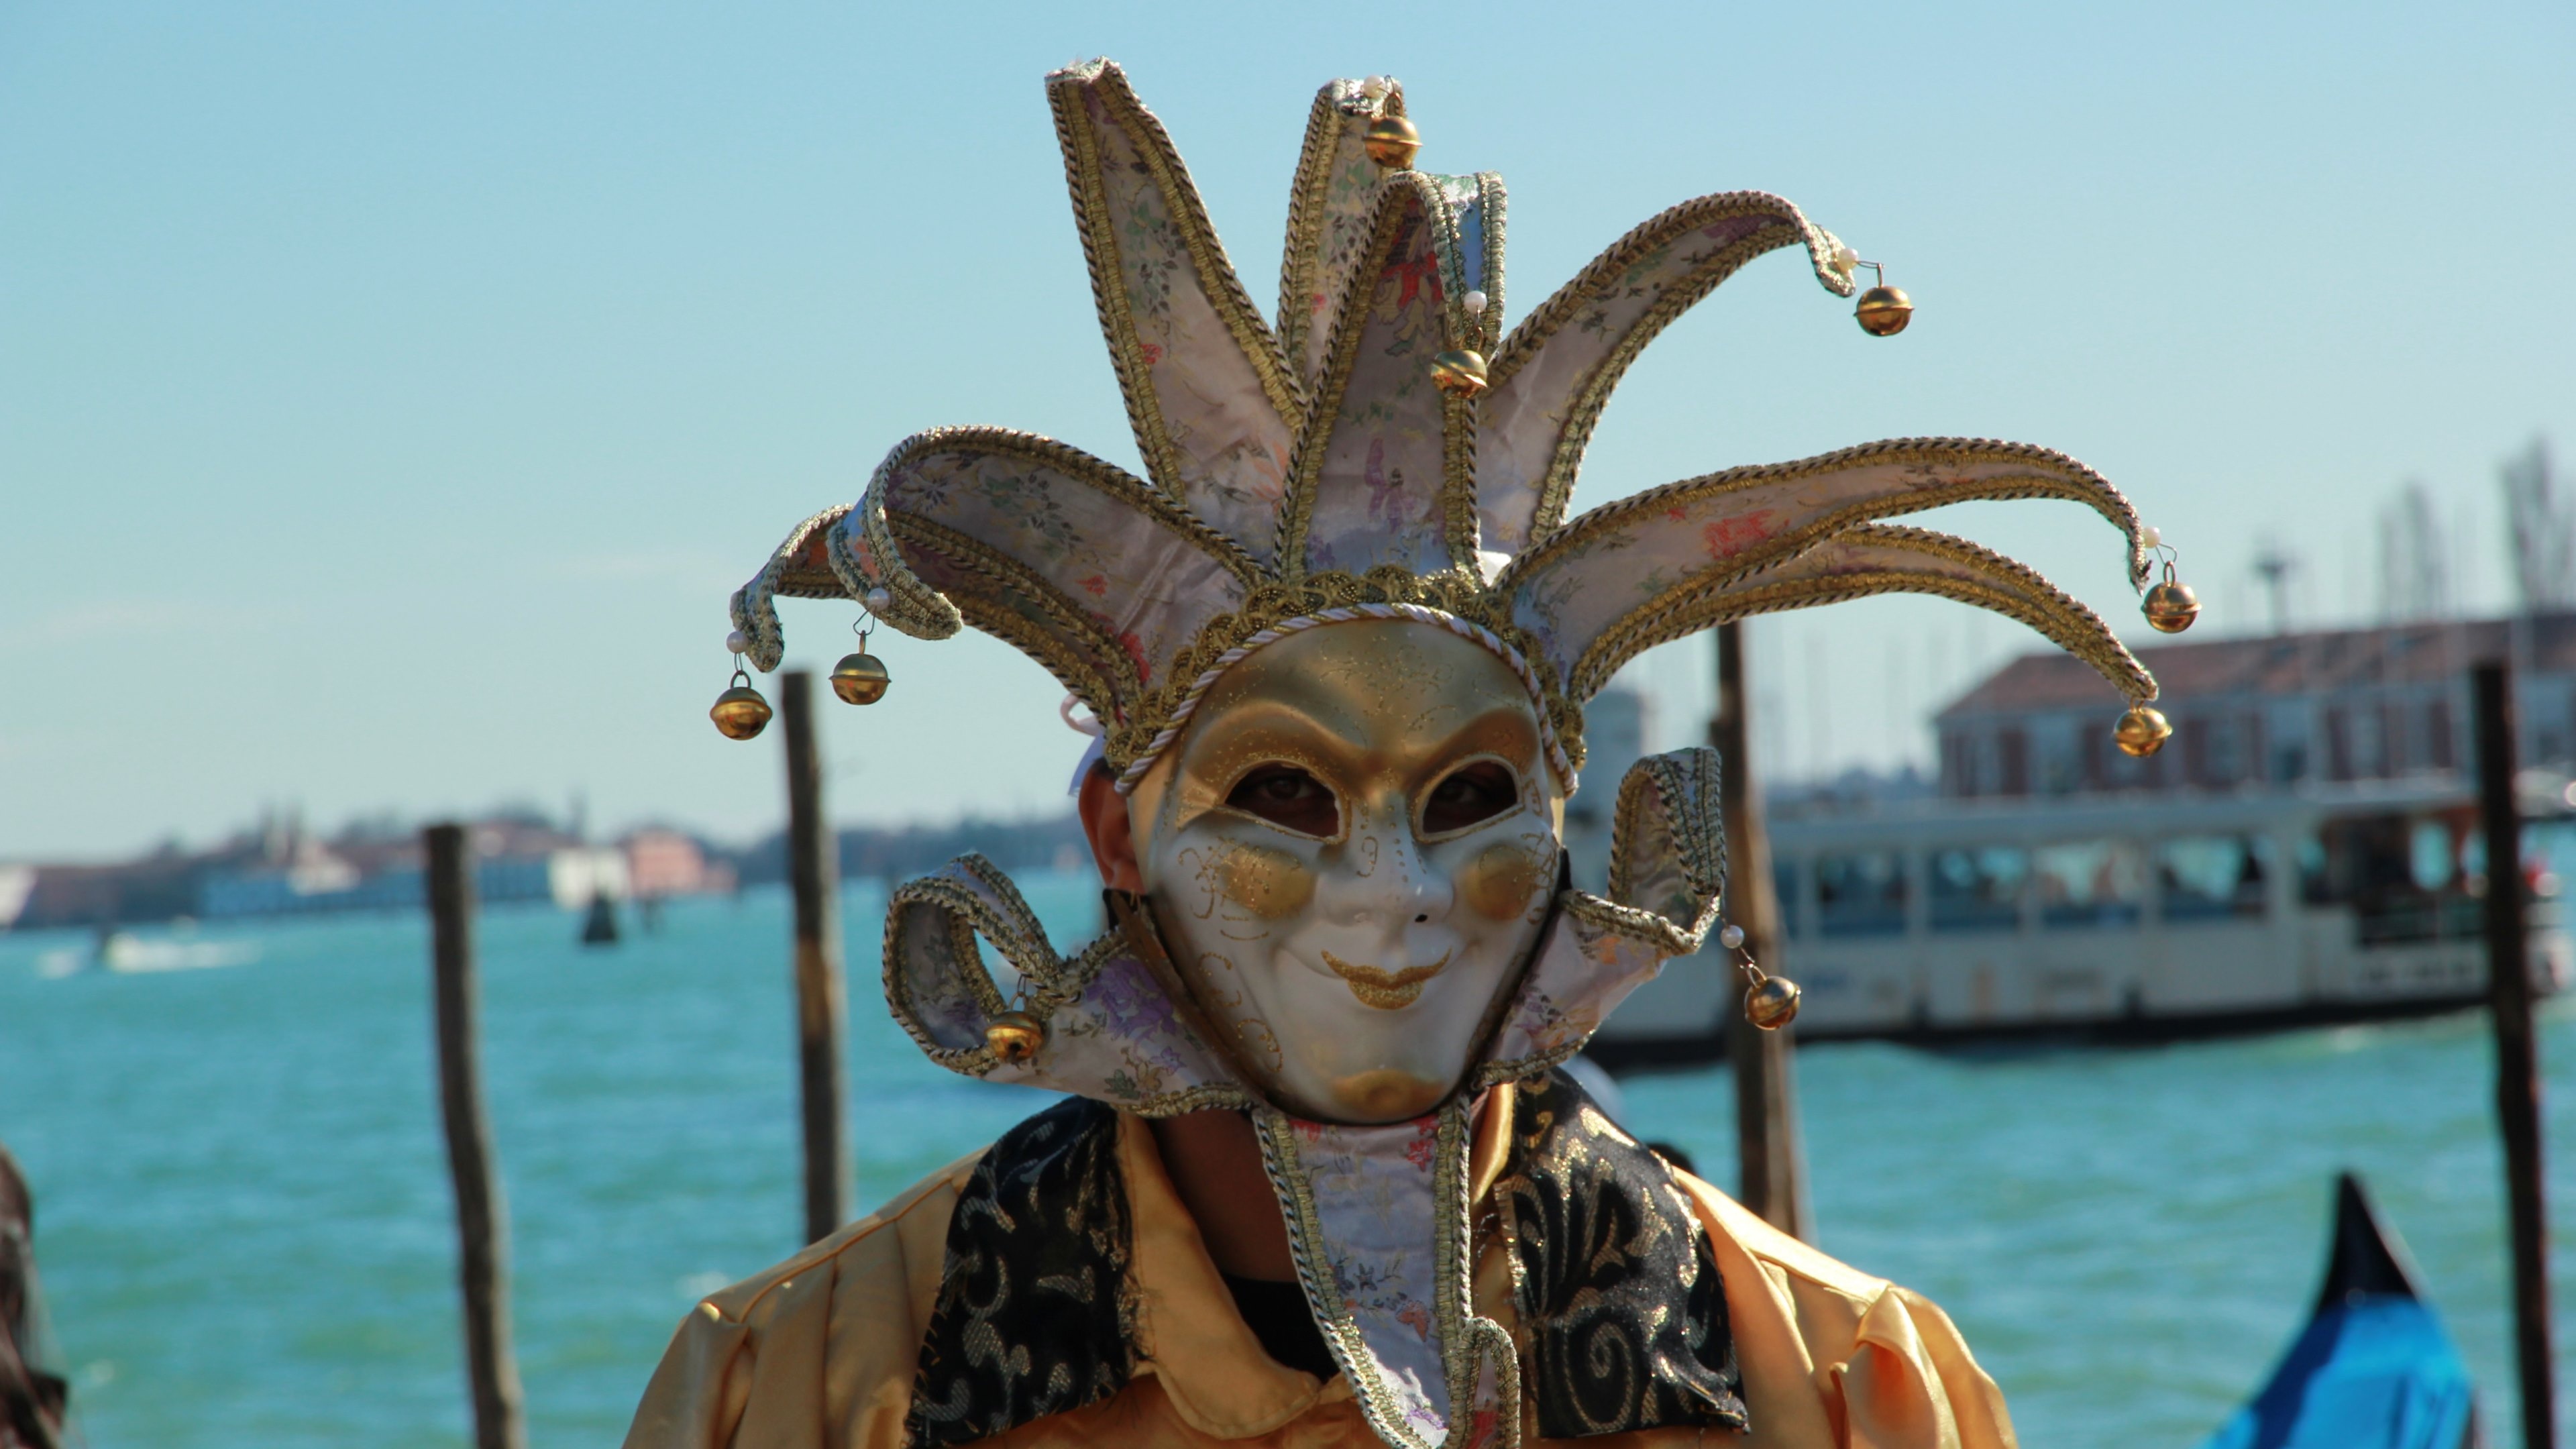 Fun Fair: The Venice carnival, A place of outside entertainment, Italy. 3840x2160 4K Background.